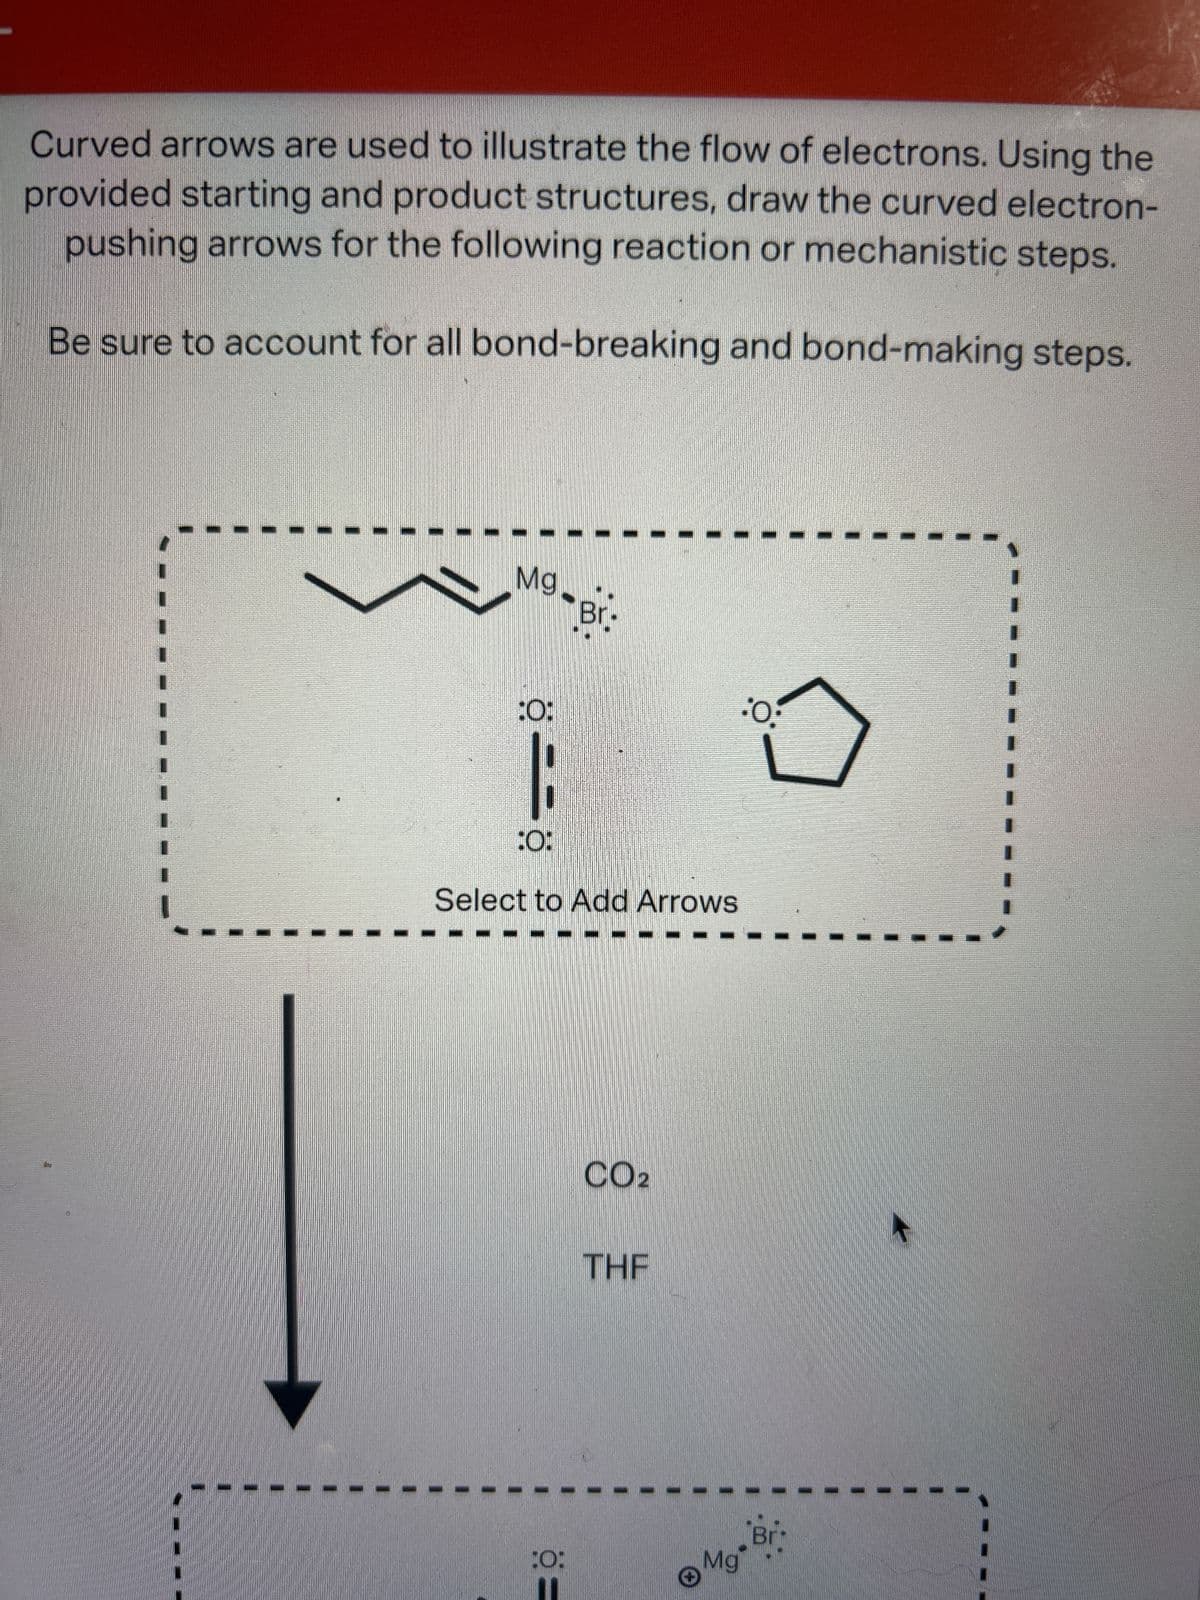 Curved arrows are used to illustrate the flow of electrons. Using the
provided starting and product structures, draw the curved electron-
pushing arrows for the following reaction or mechanistic steps.
Be sure to account for all bond-breaking and bond-making steps.
Mg.
:0:
|
:0:
Select to Add Arrows
Ö=
Br
:O:
CO2
THE
Mg
·O·
Br
K